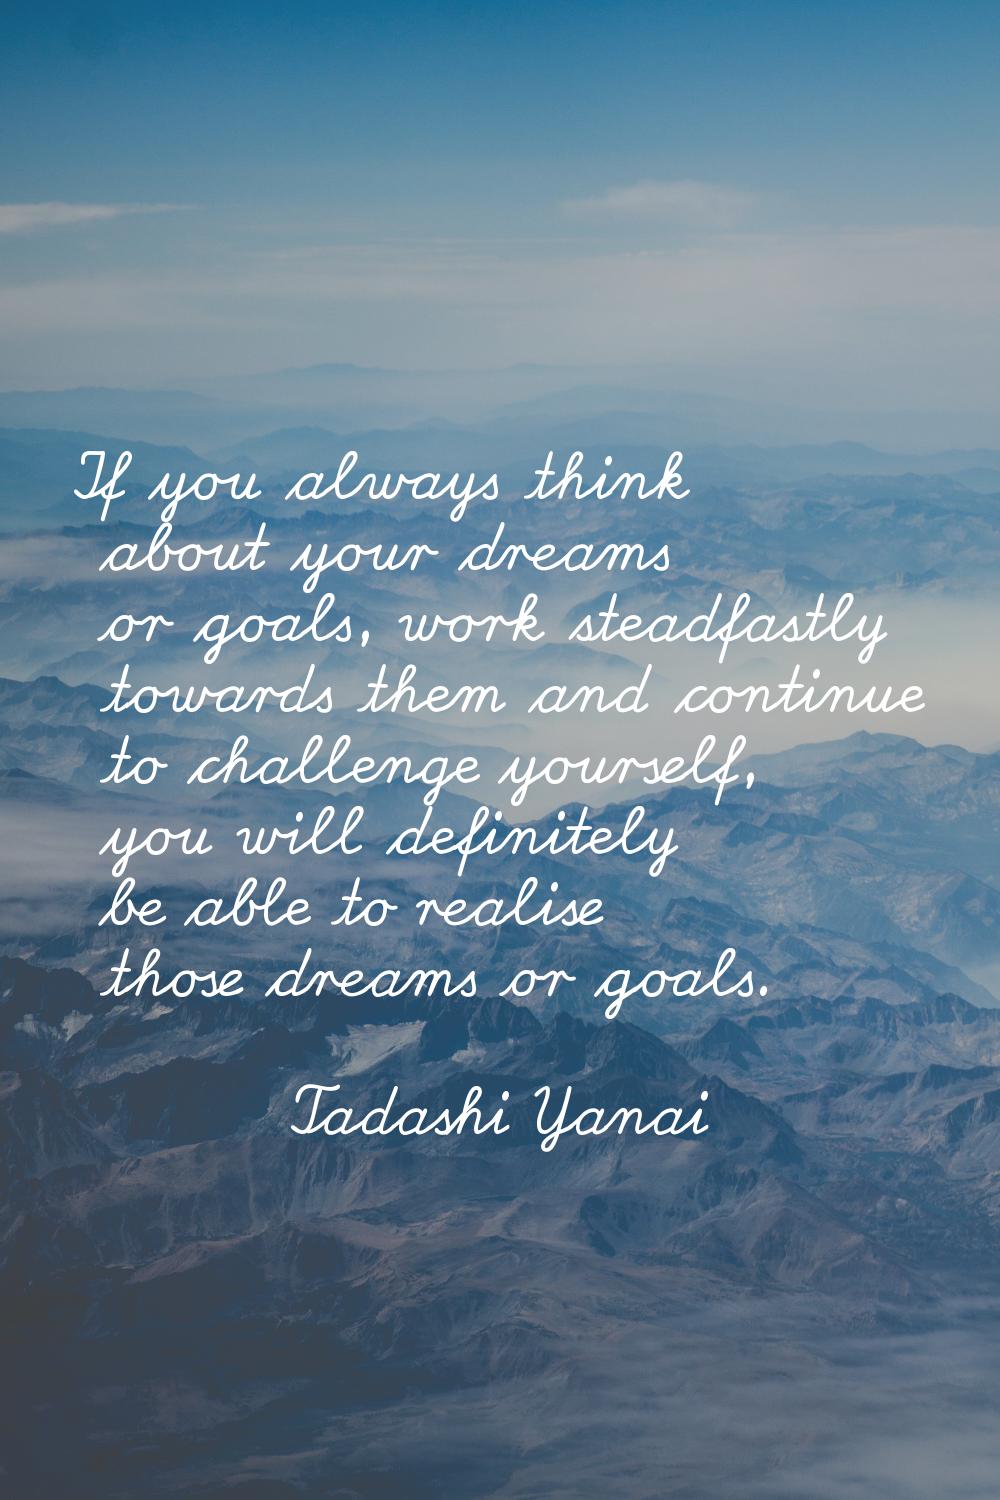 If you always think about your dreams or goals, work steadfastly towards them and continue to chall